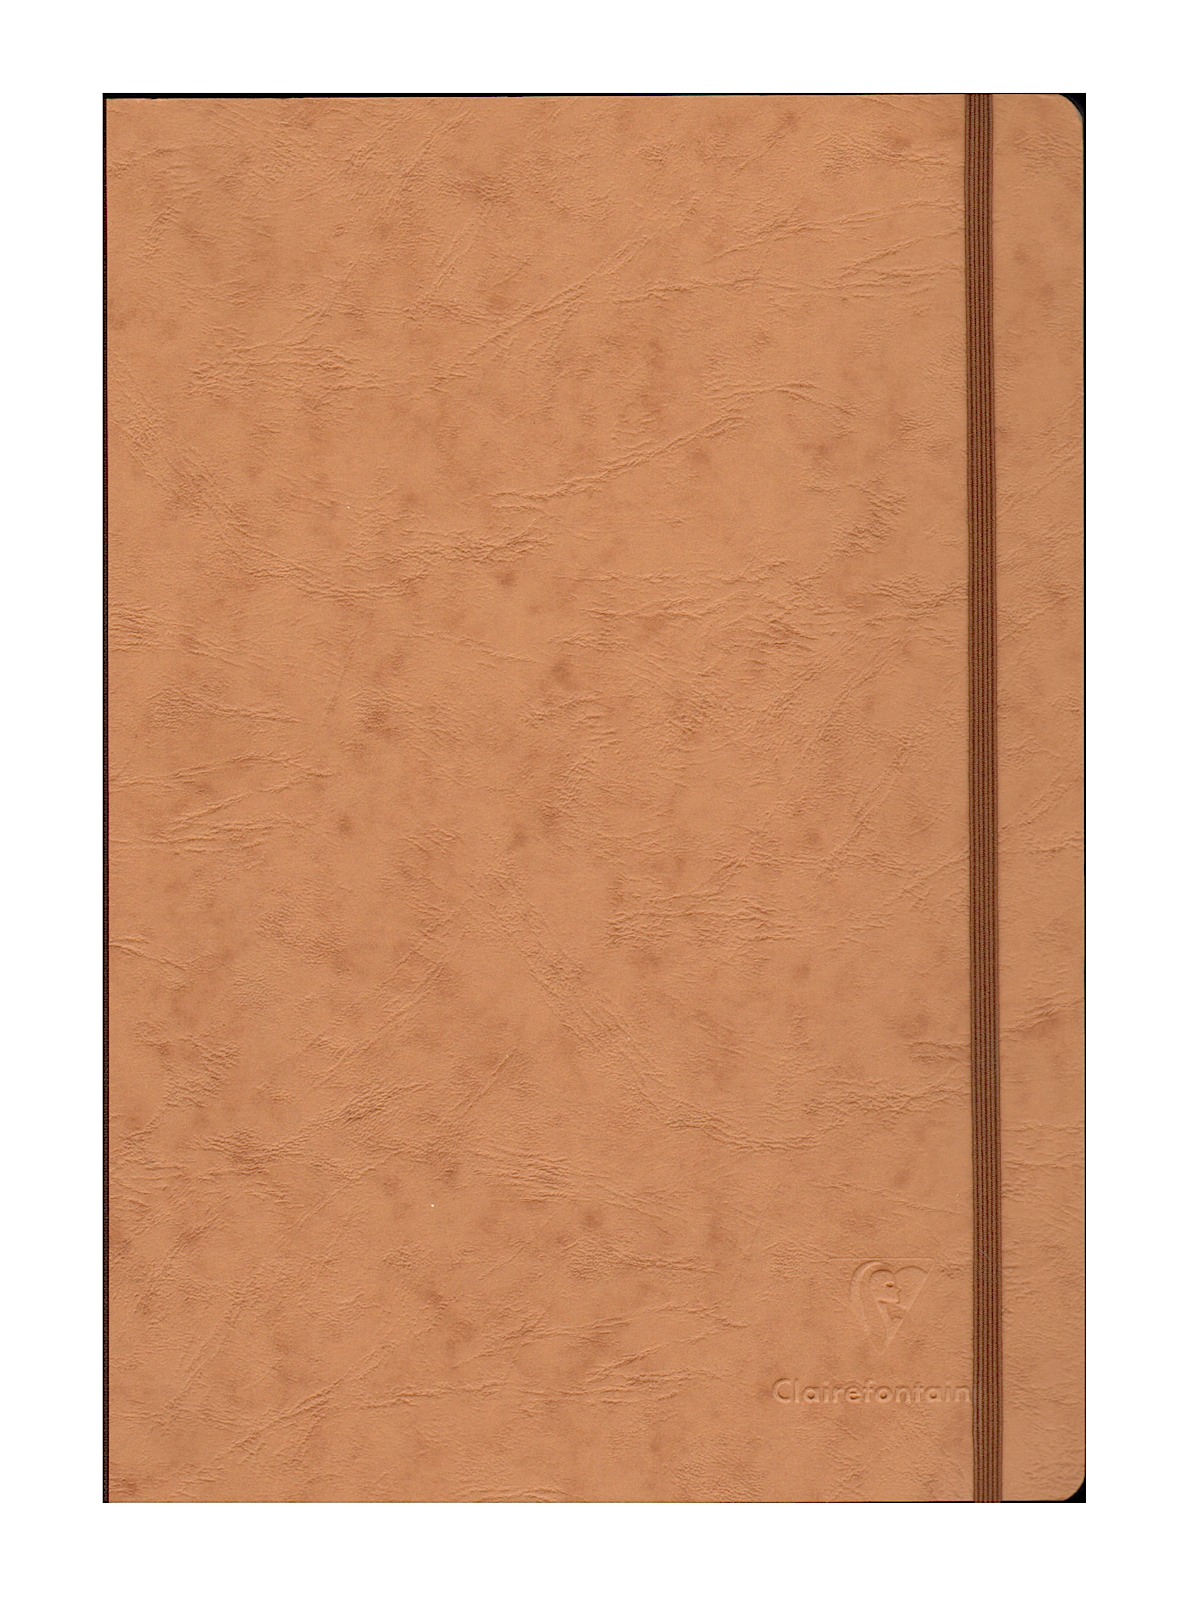 Cloth-bound Notebooks 8 1 4 In. X 11 3 4 In. Ruled, Tan Cover, Elastic Closure 96 Sheets